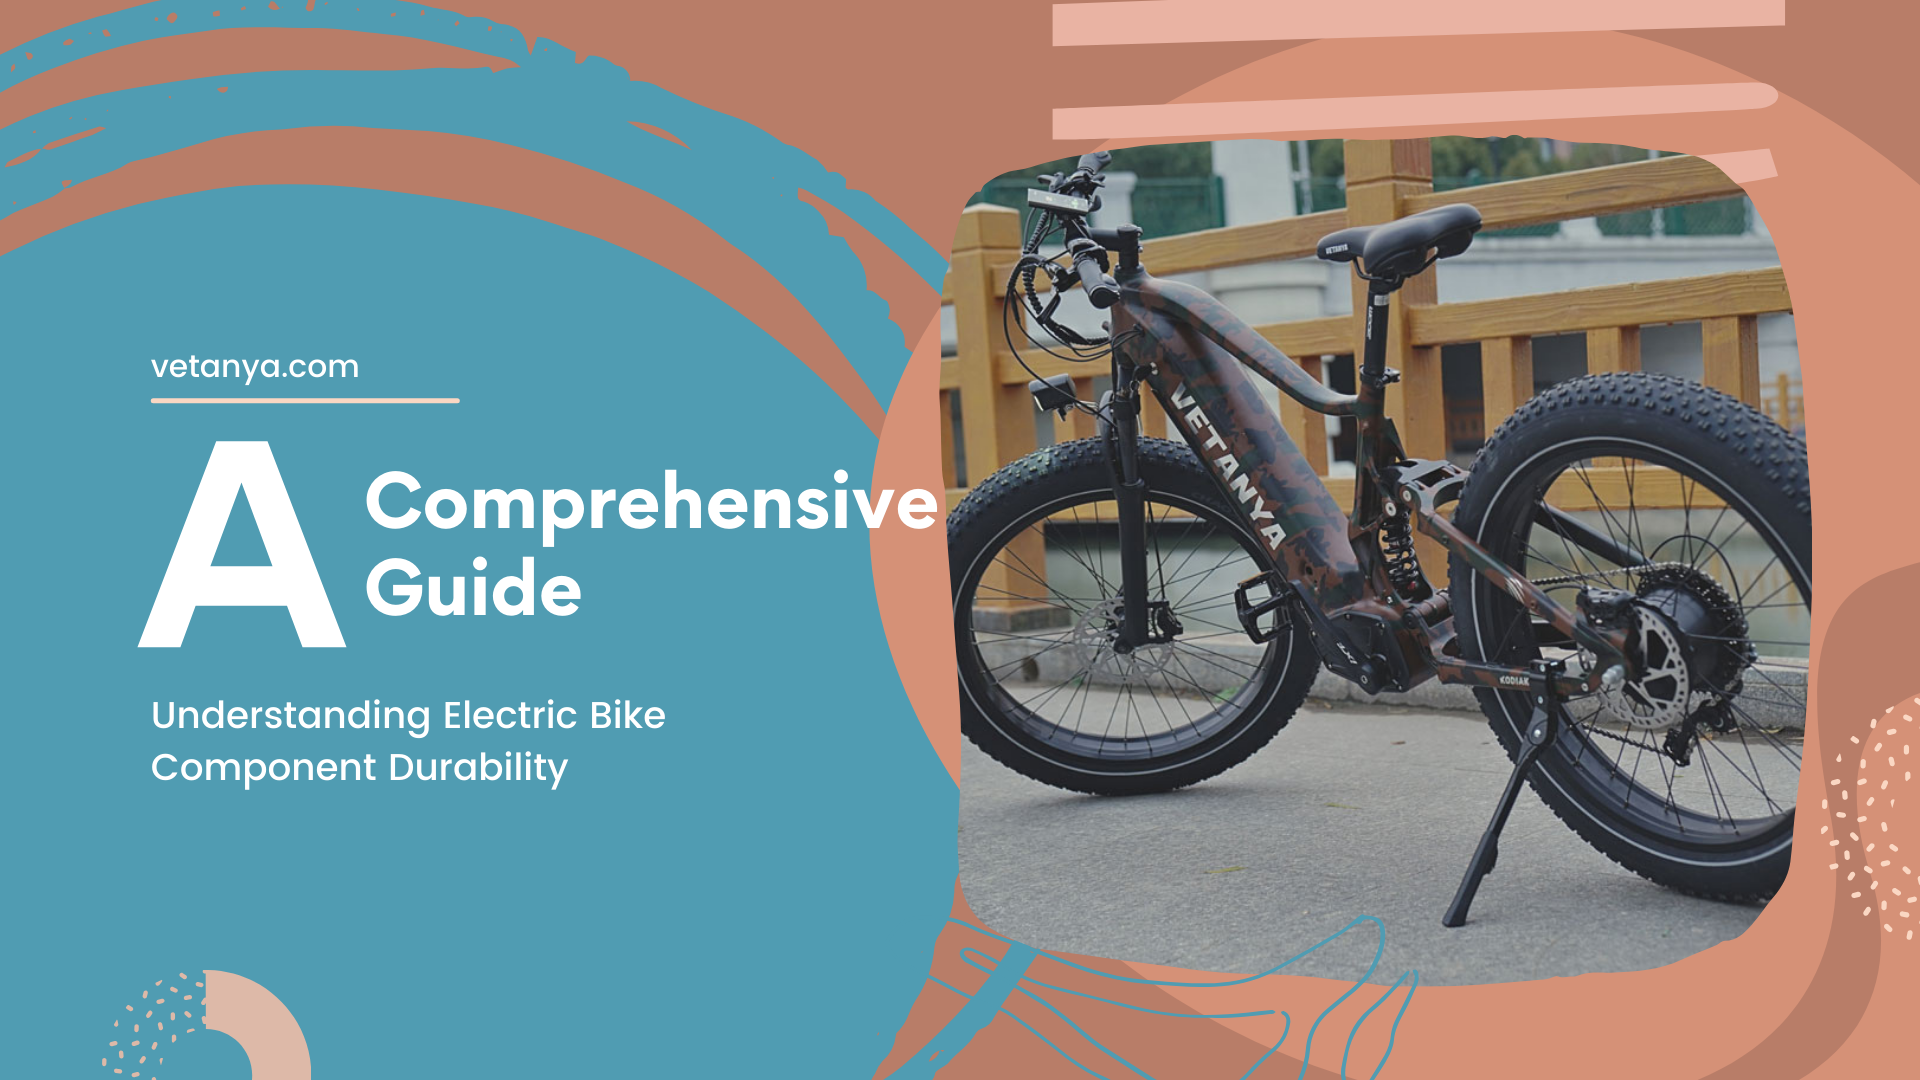 A Comprehensive Guide: Understanding Electric Bike Component Durability